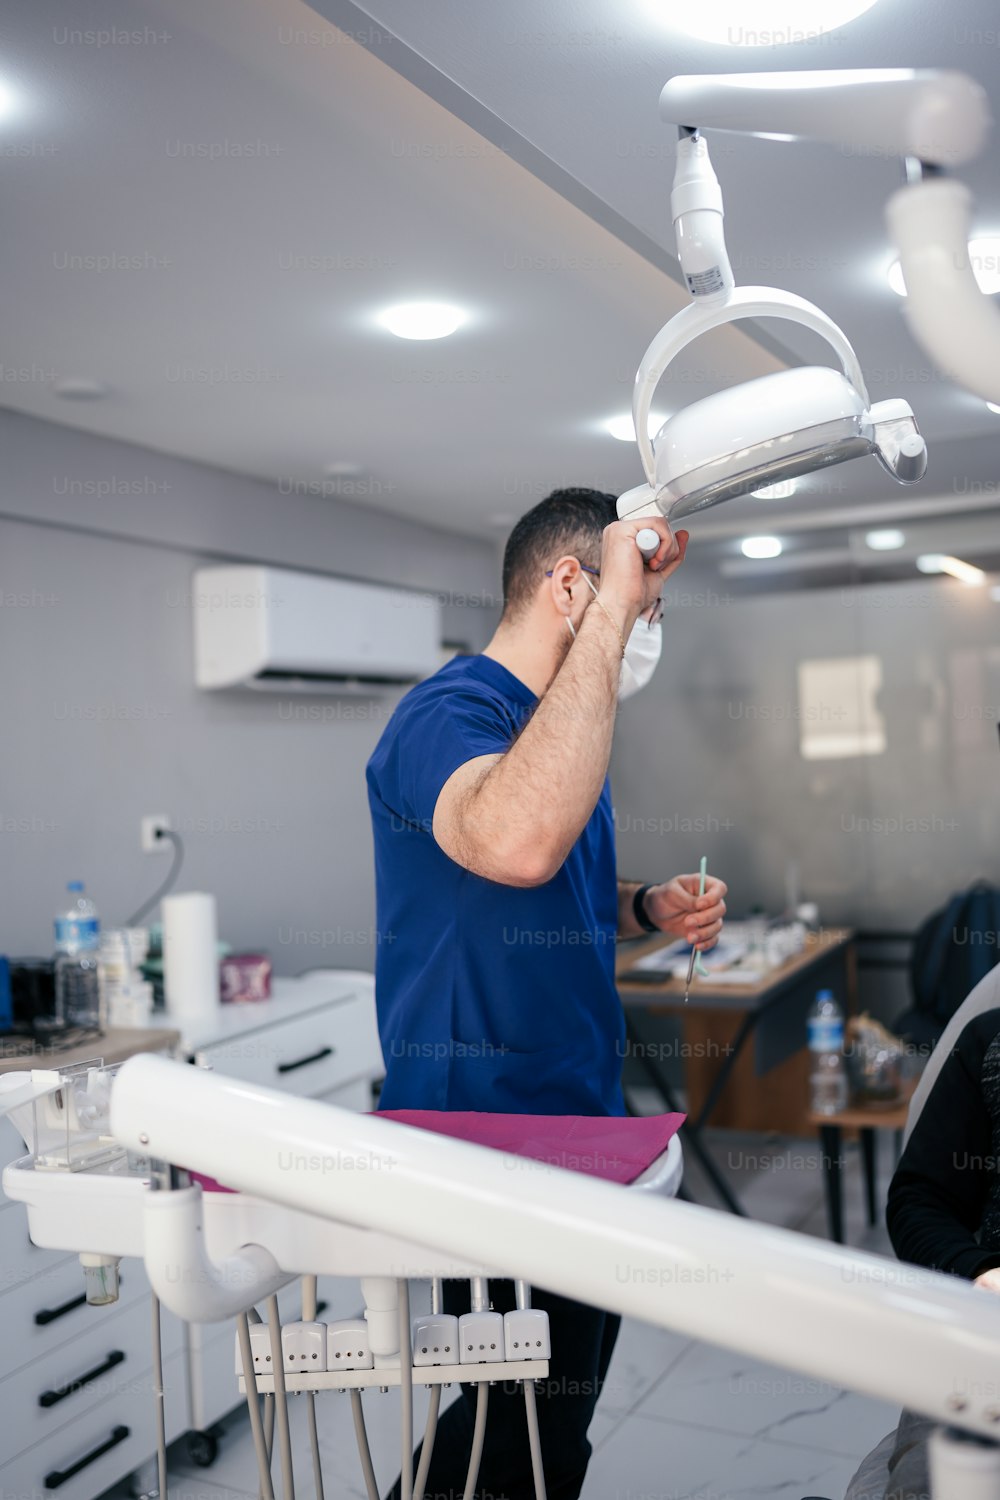 a man standing in a dentist's office holding a light above his head